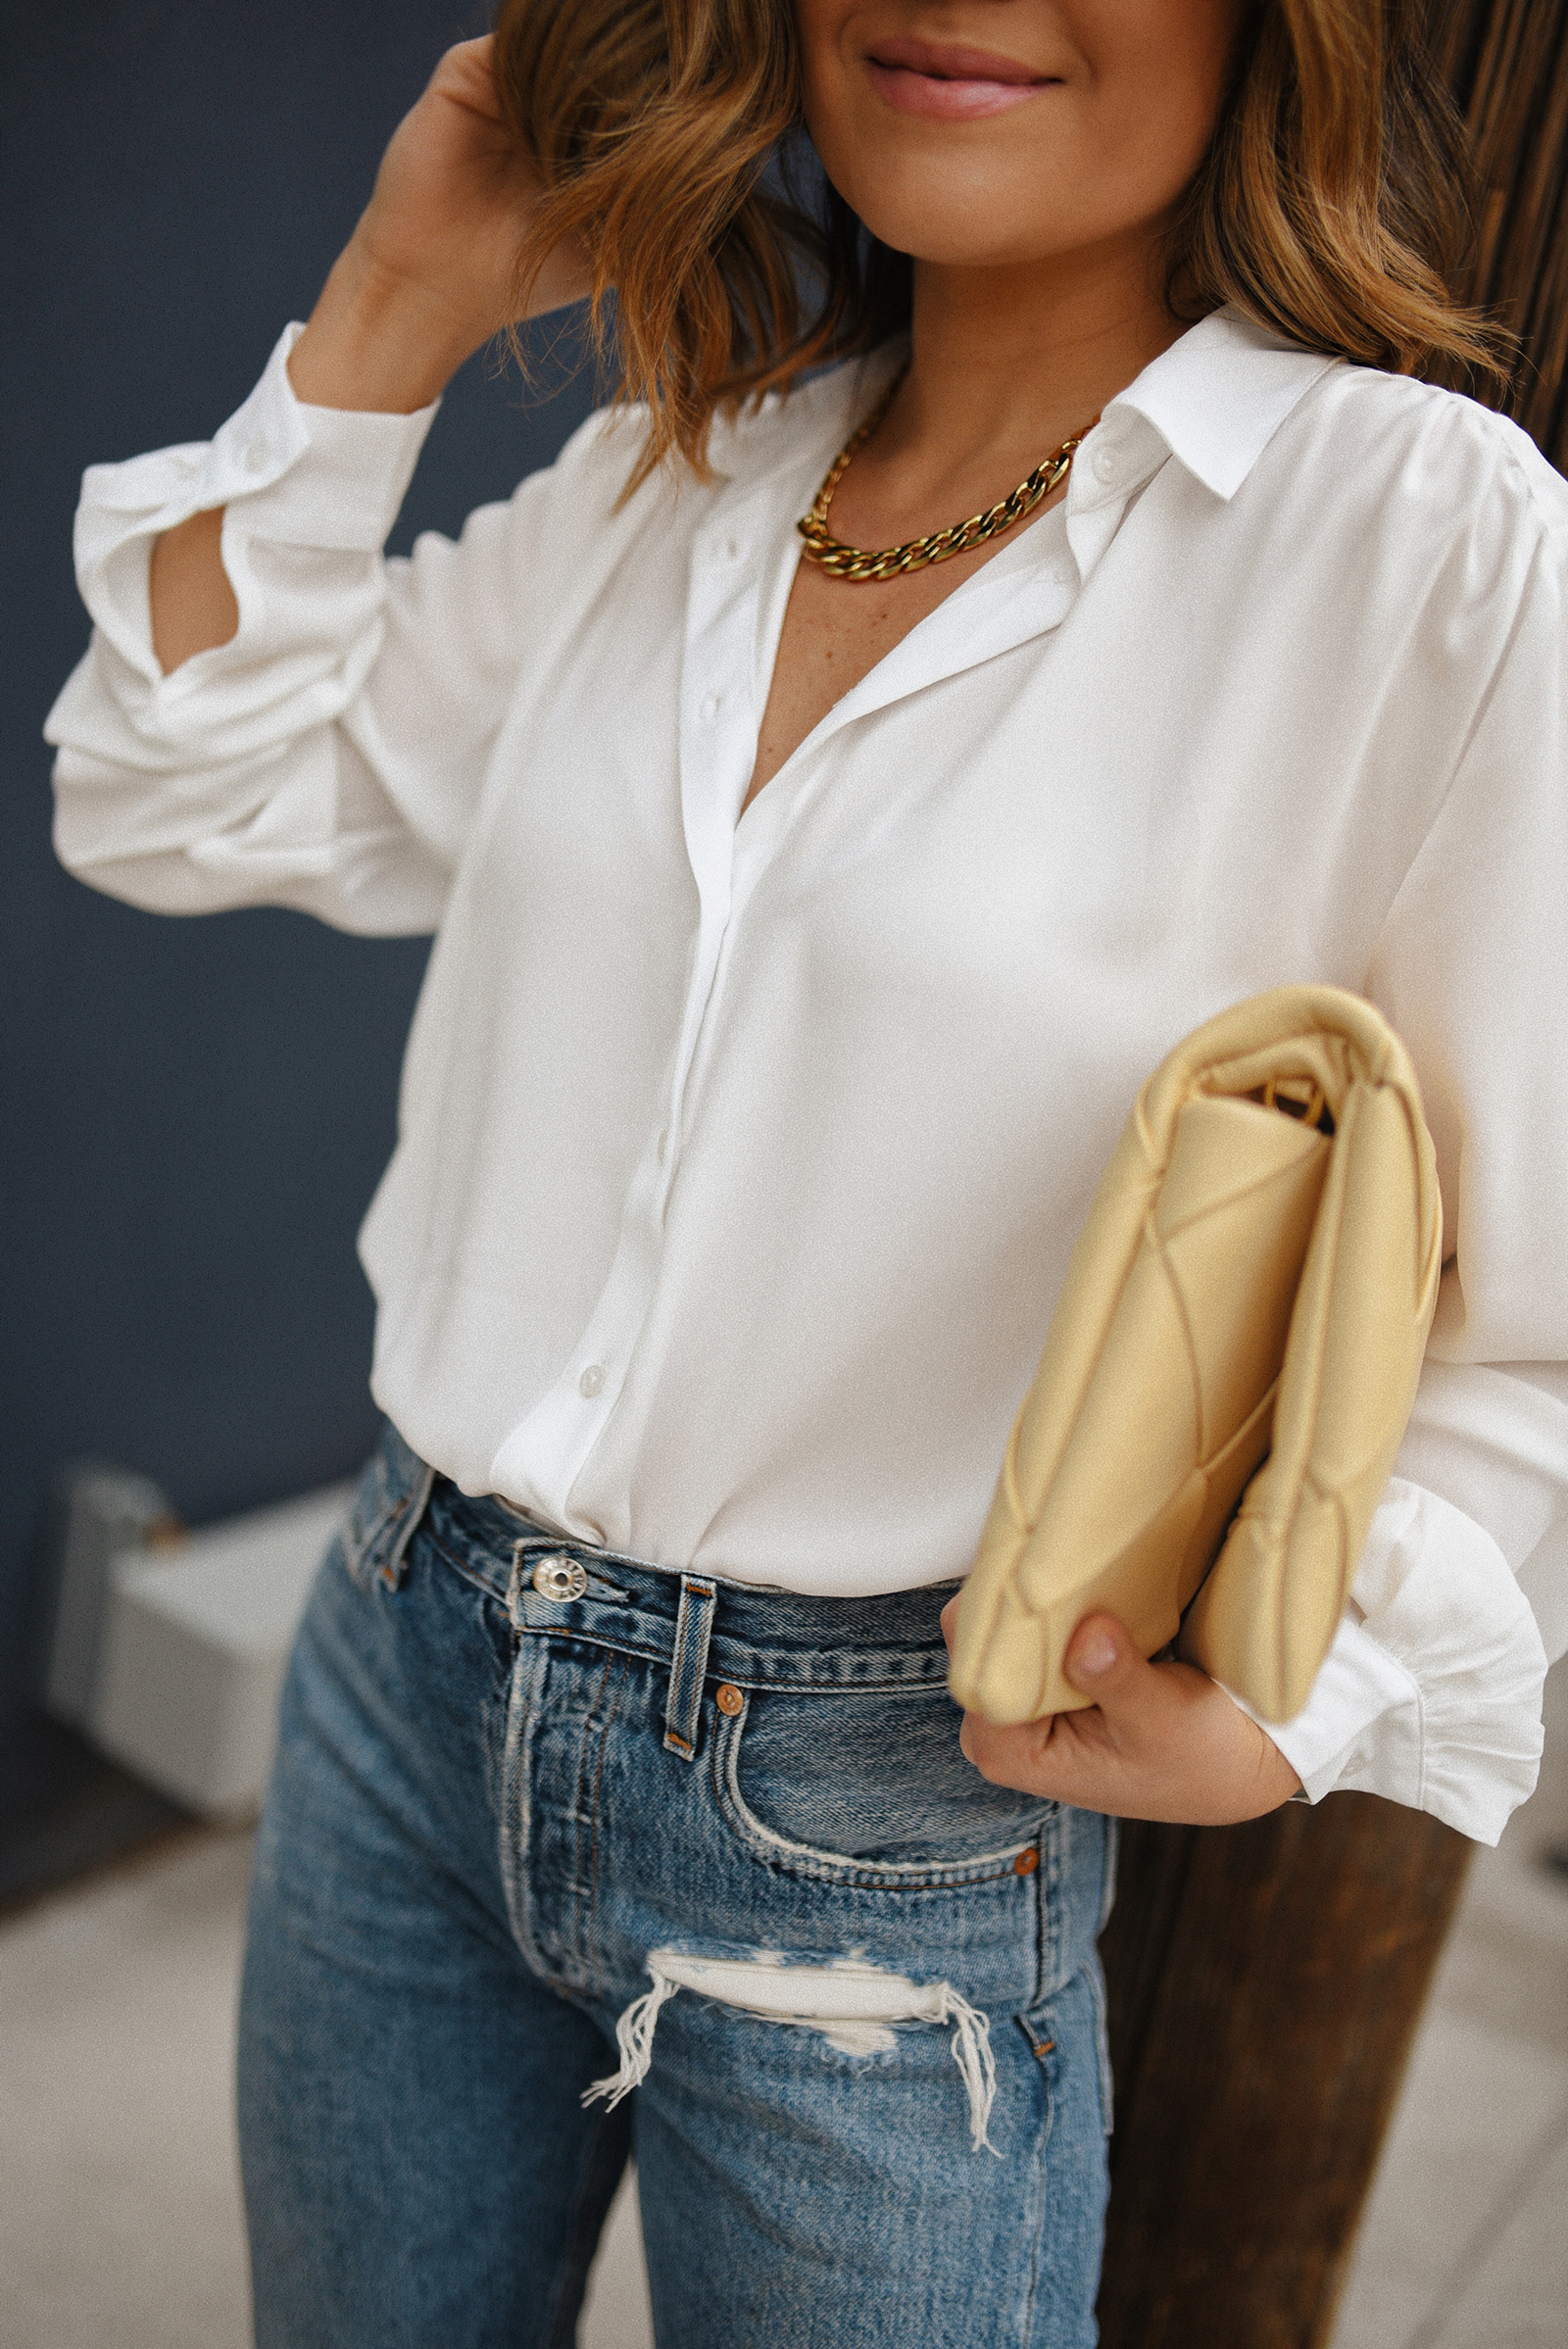 Carolina Hellal of Chic Talk wearing a white button down via H&M, Agolde jeans, Vince Camuto open toe booties, Rayban sunglasses and Topshop yellow clutch. 